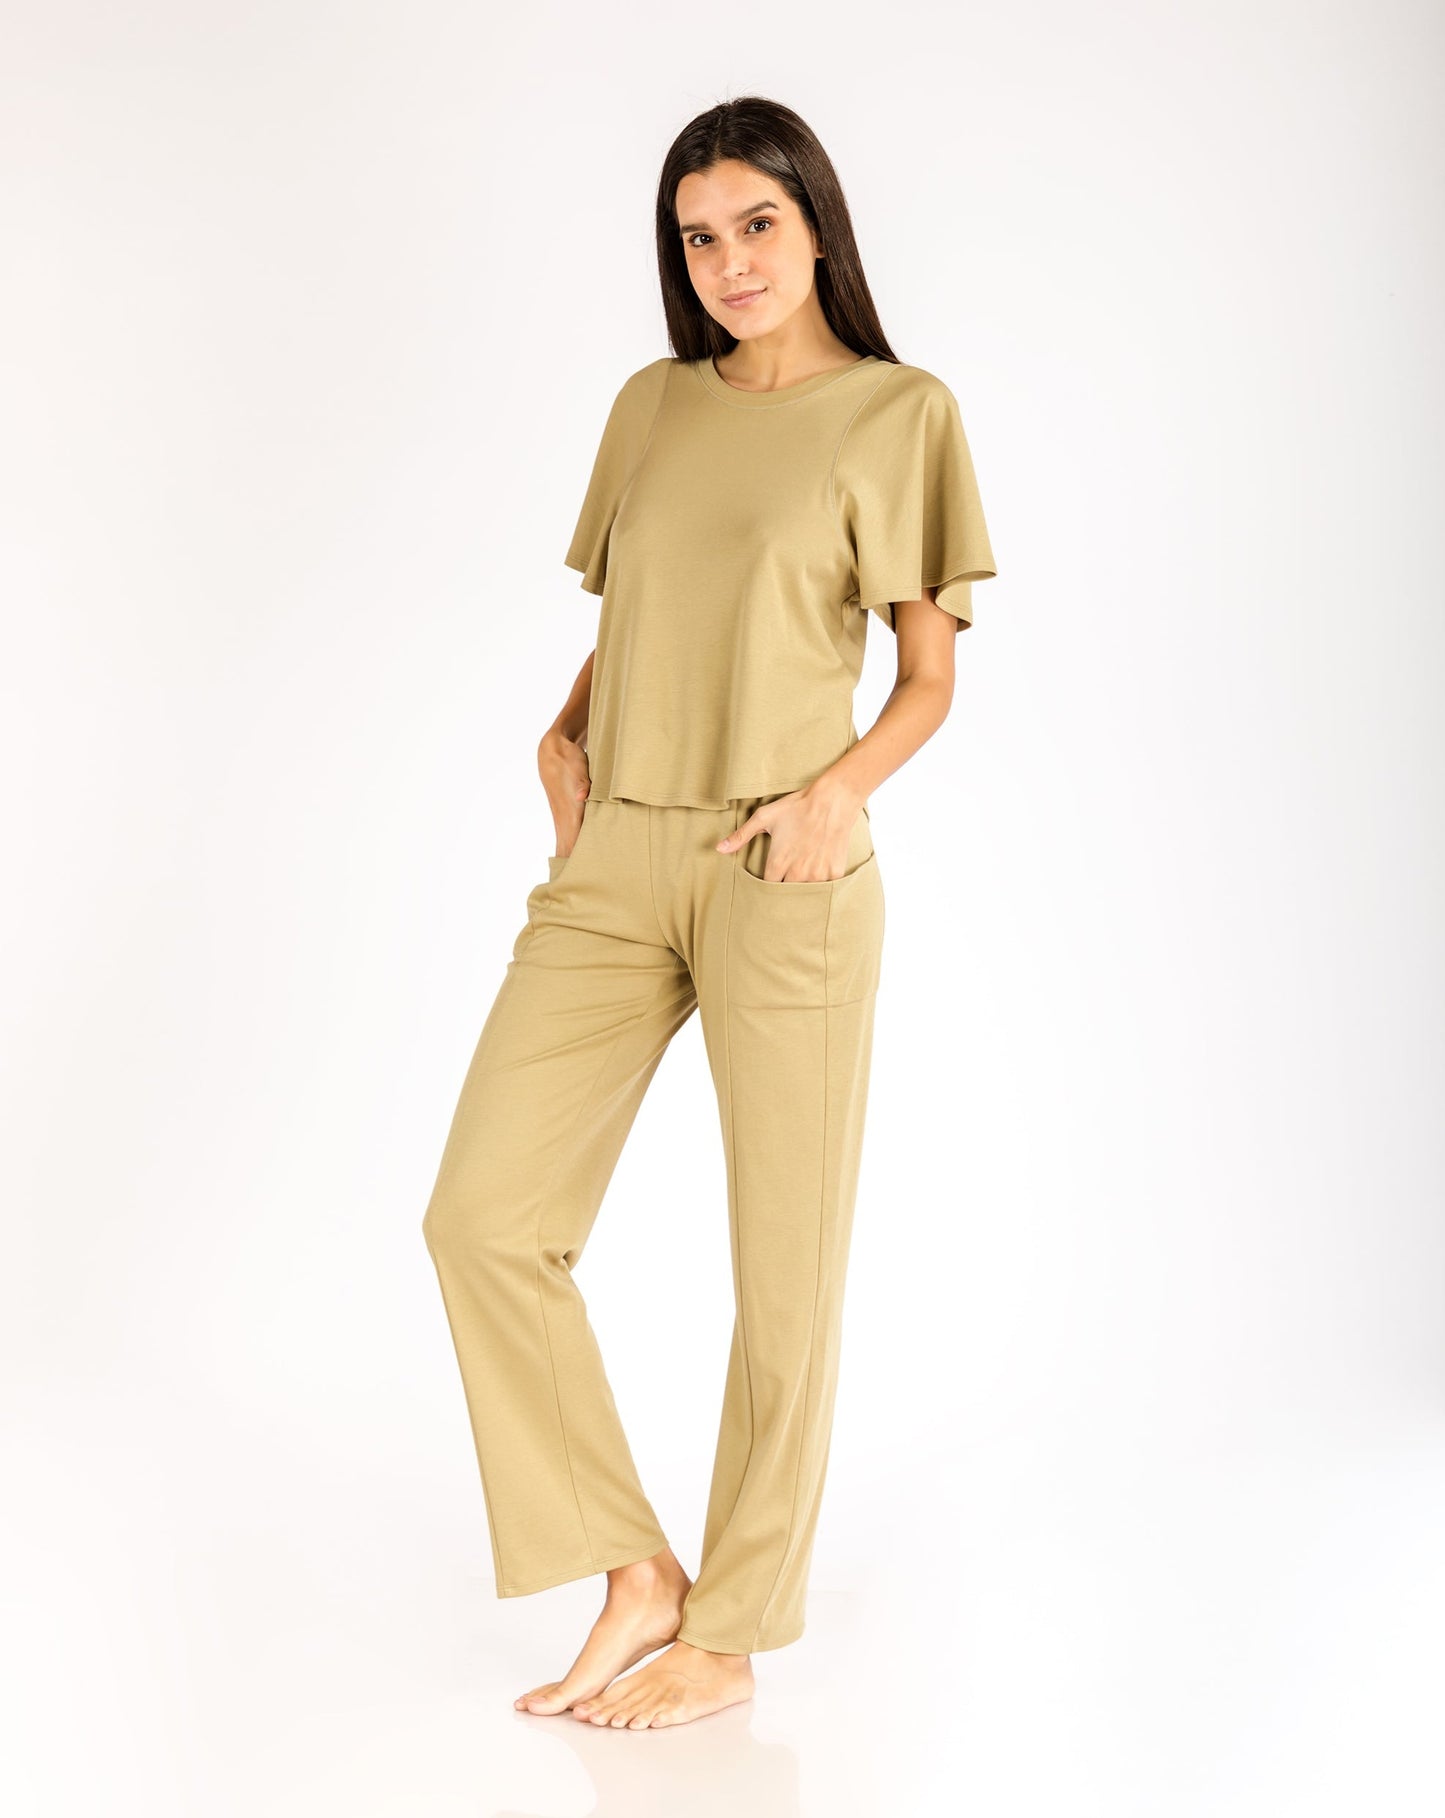 women_s-pajama-set-Straight-pant-with-pocket-detail-and-top-with-oversized-sleeves-olive-Lavender-Dreams-1